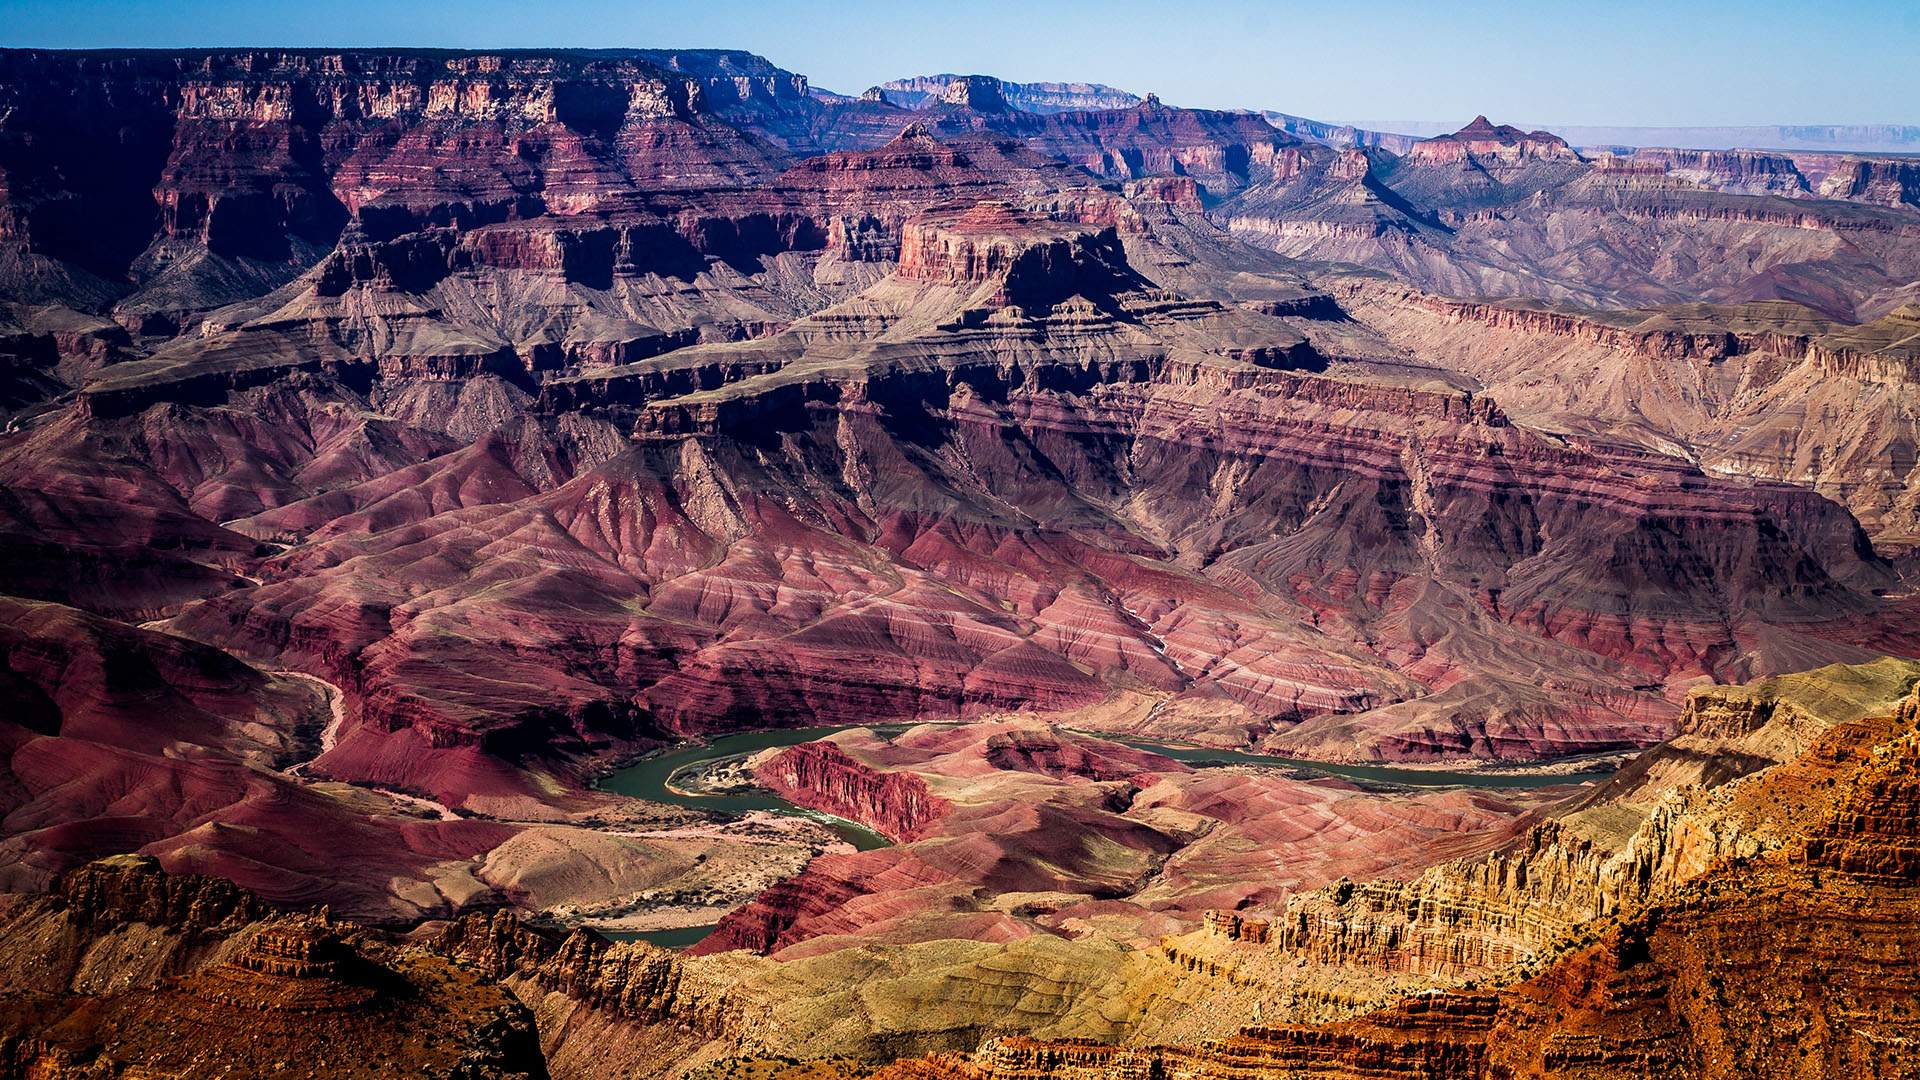 You Can Now Soar 300 Metres Above the Grand Canyon Via Zipline